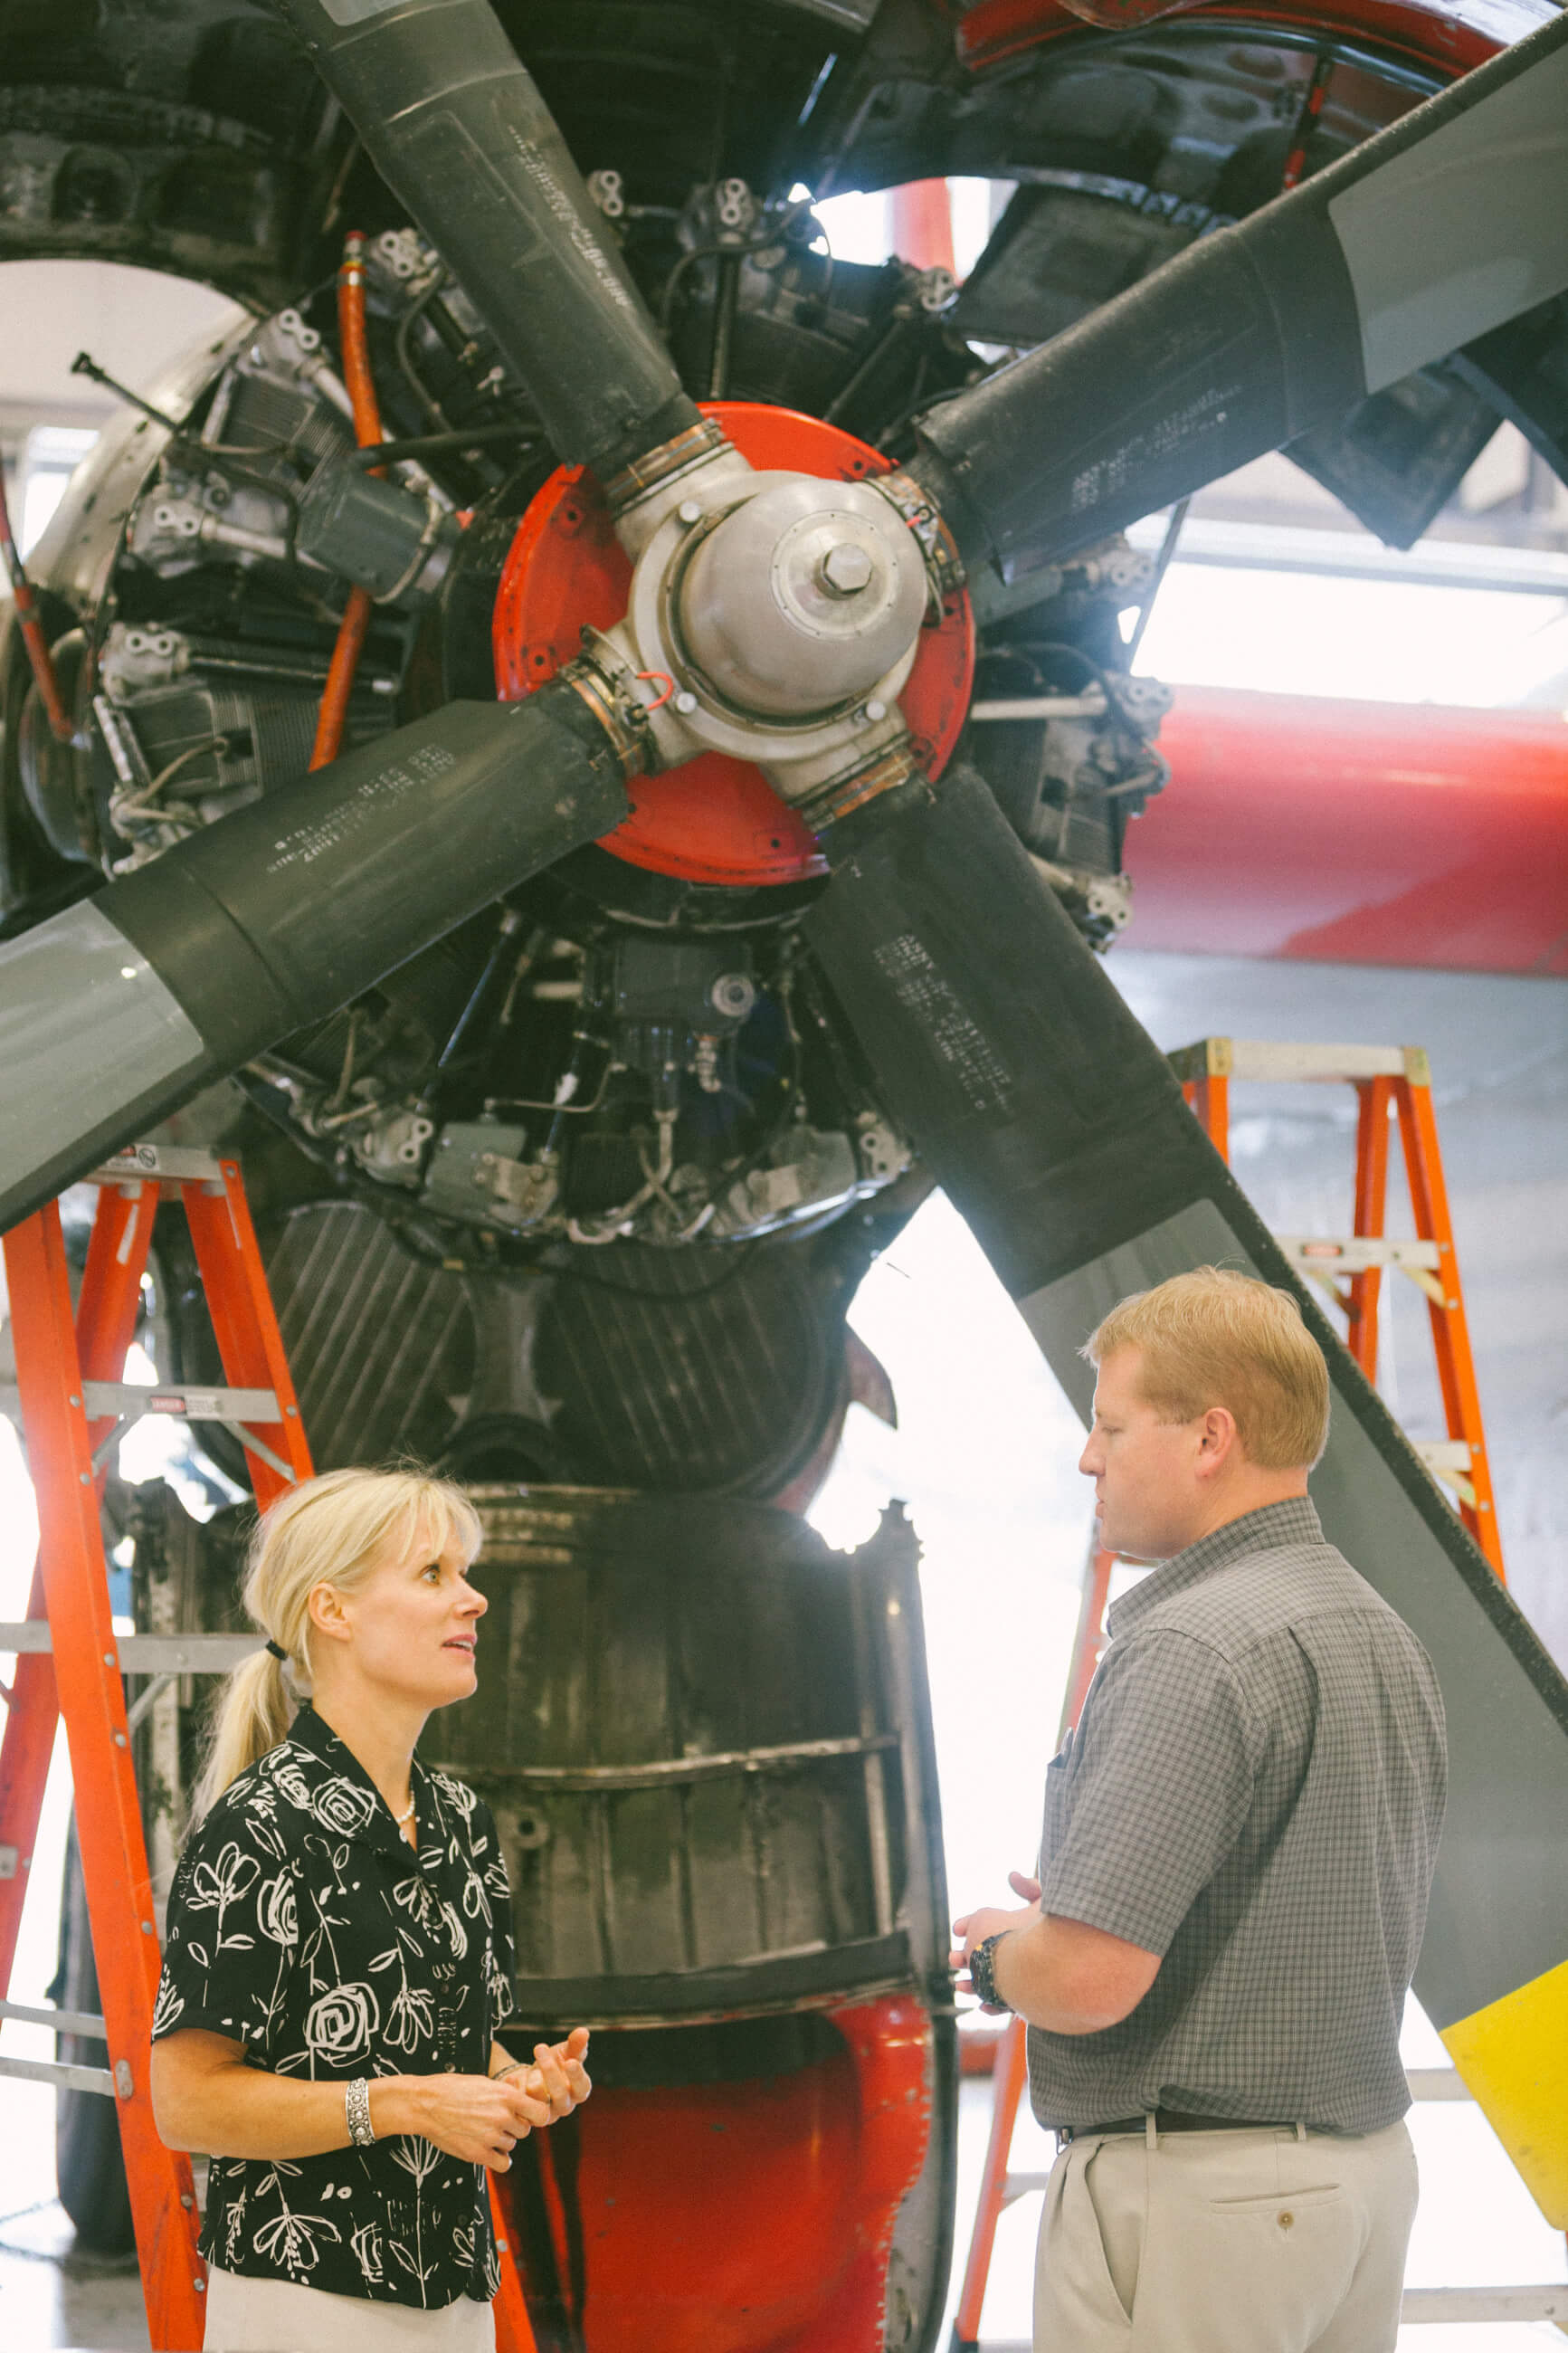 A woman speaks to a man in front of a firefighting airplane's front propeller